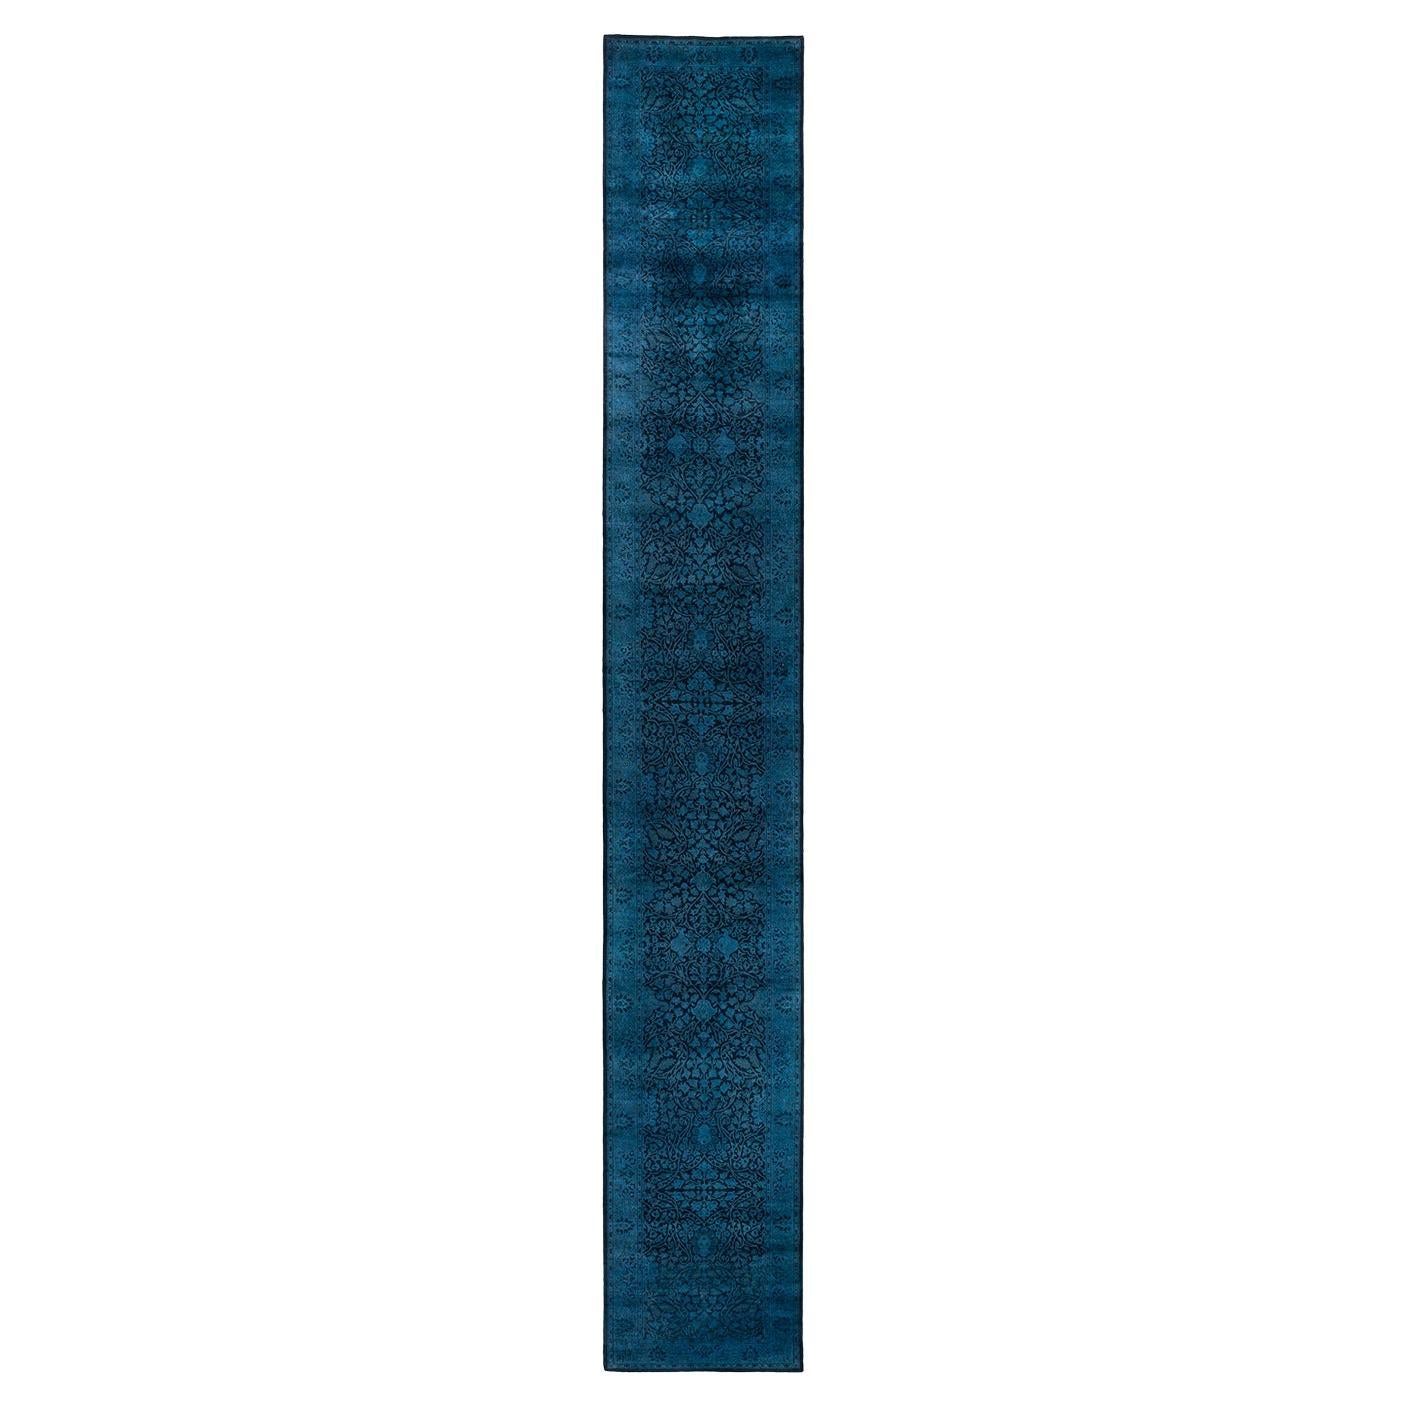 Contemporary Overdyed Hand Knotted Wool Black Runner